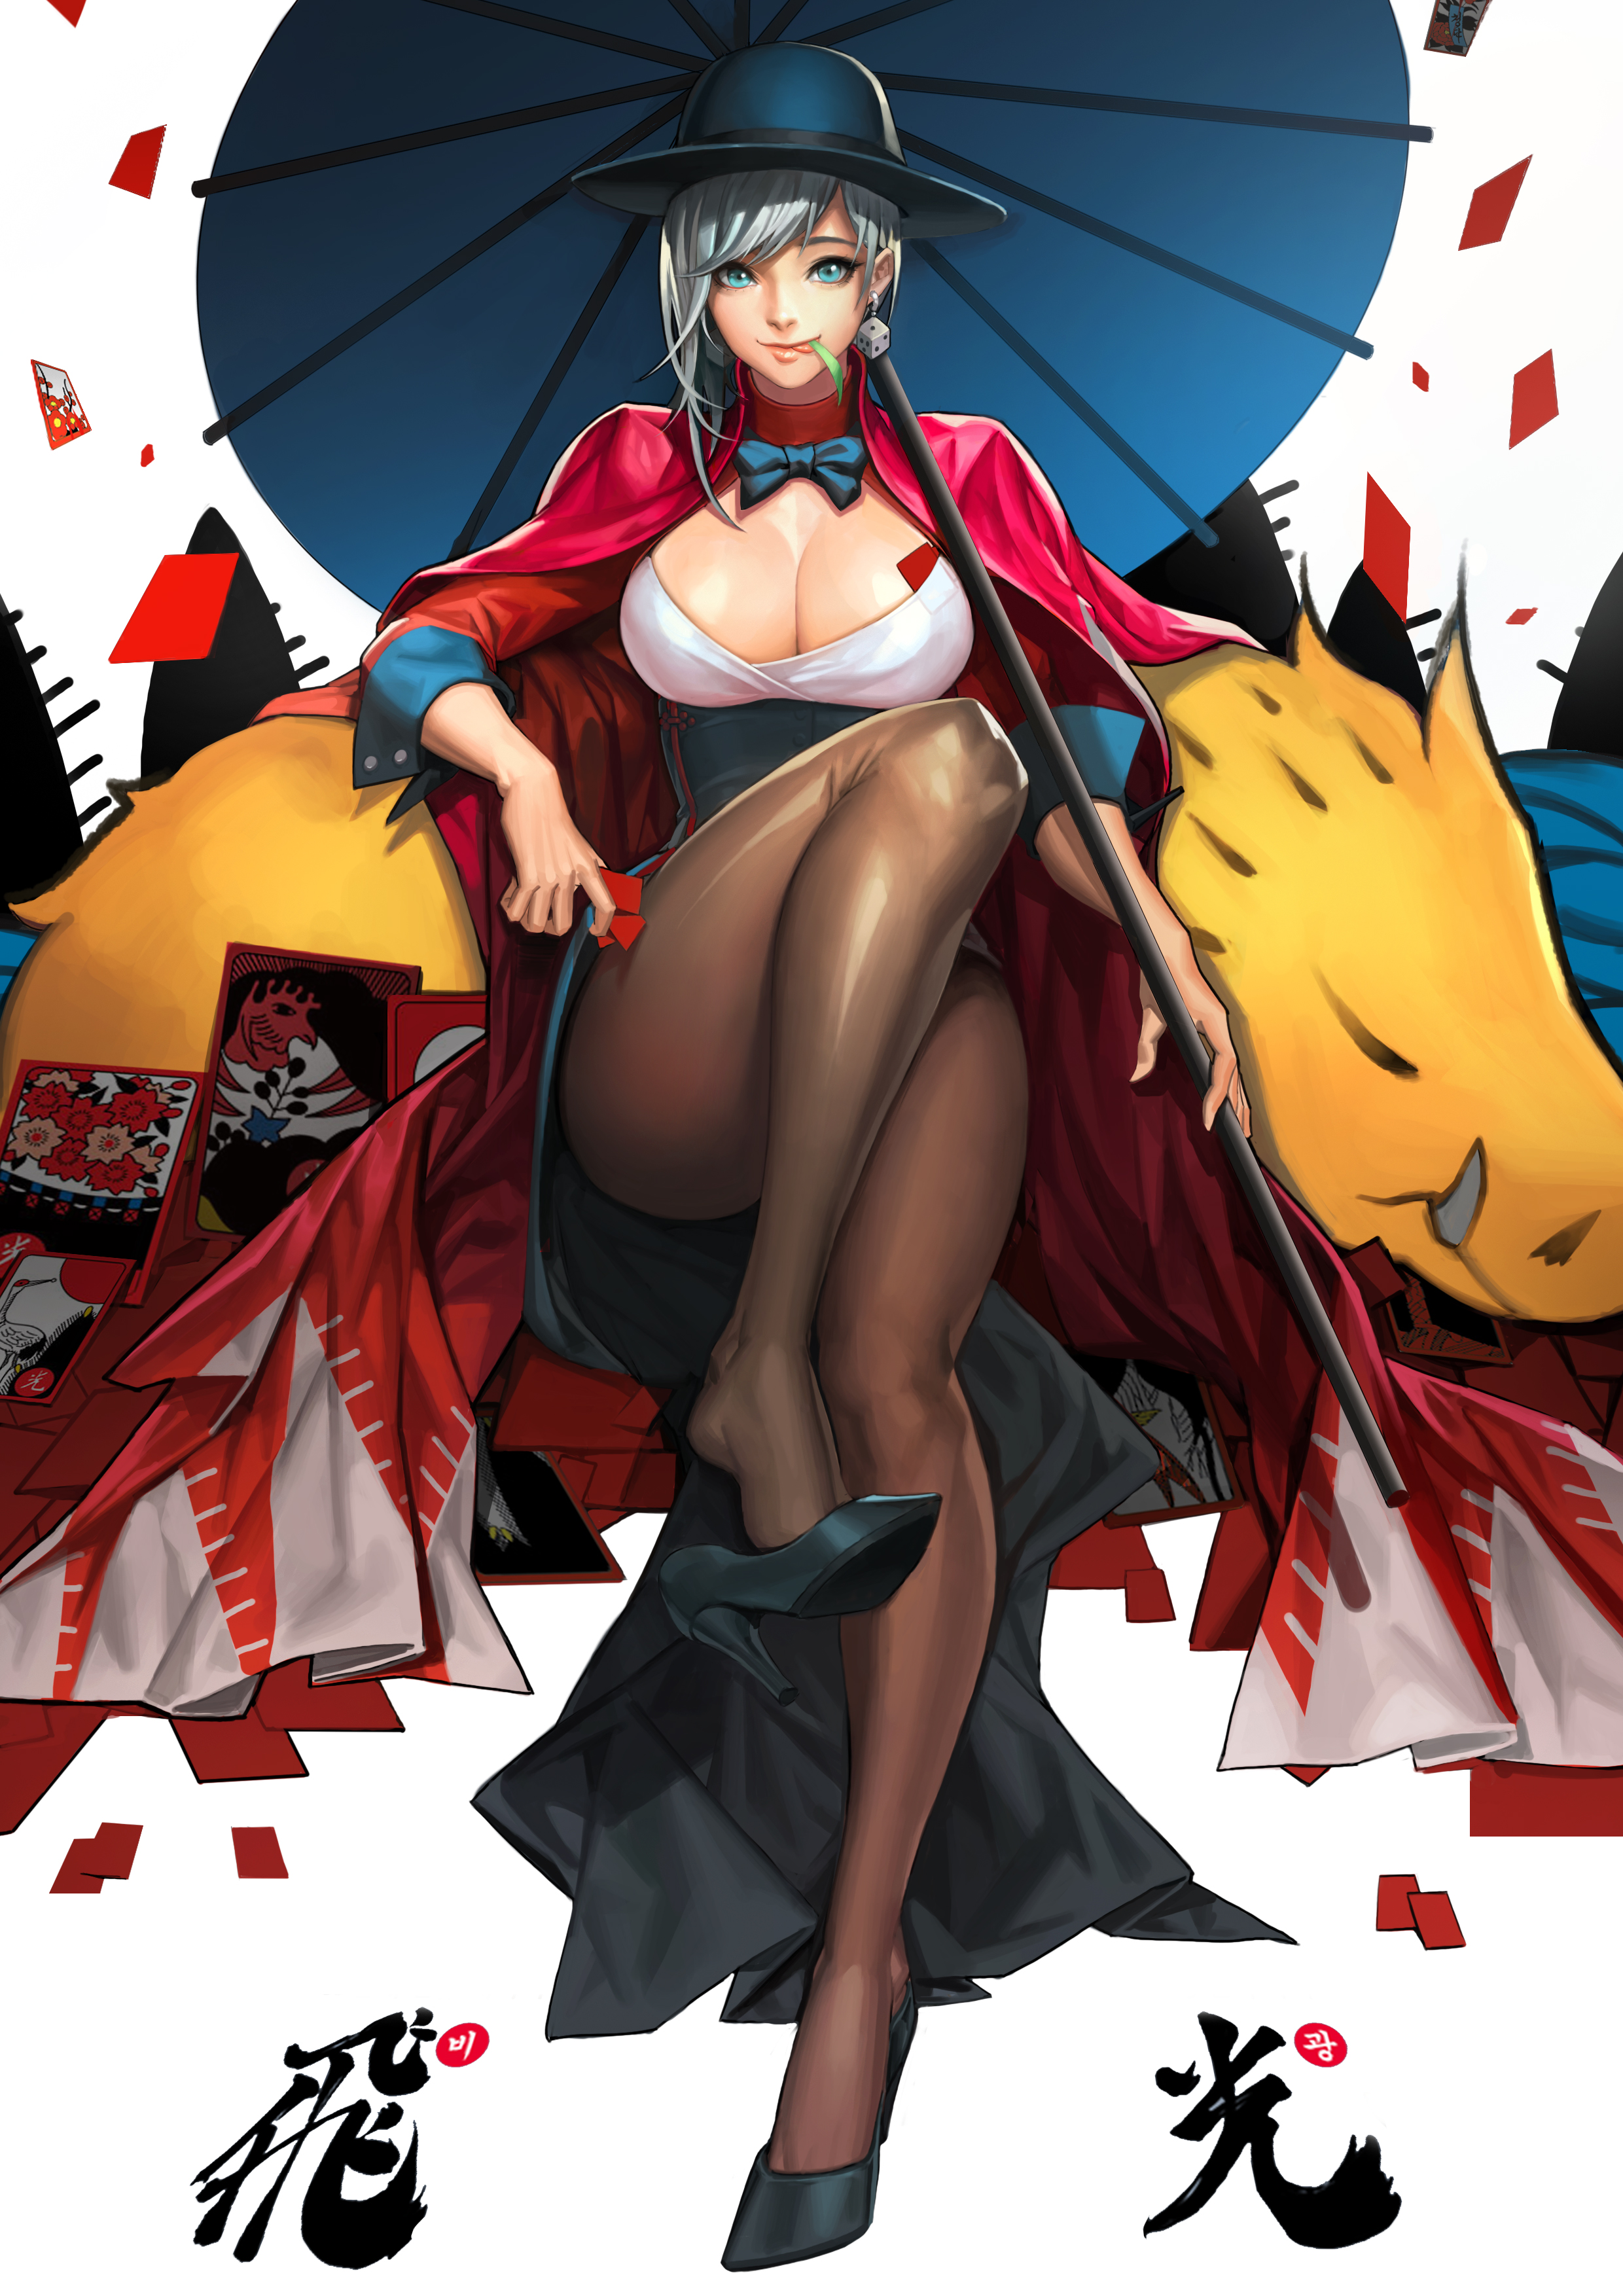 Anime 2480x3508 cleavage black pantyhose anime anime girls legs legs together hat women with hats boobs big boobs pantyhose heels black heels